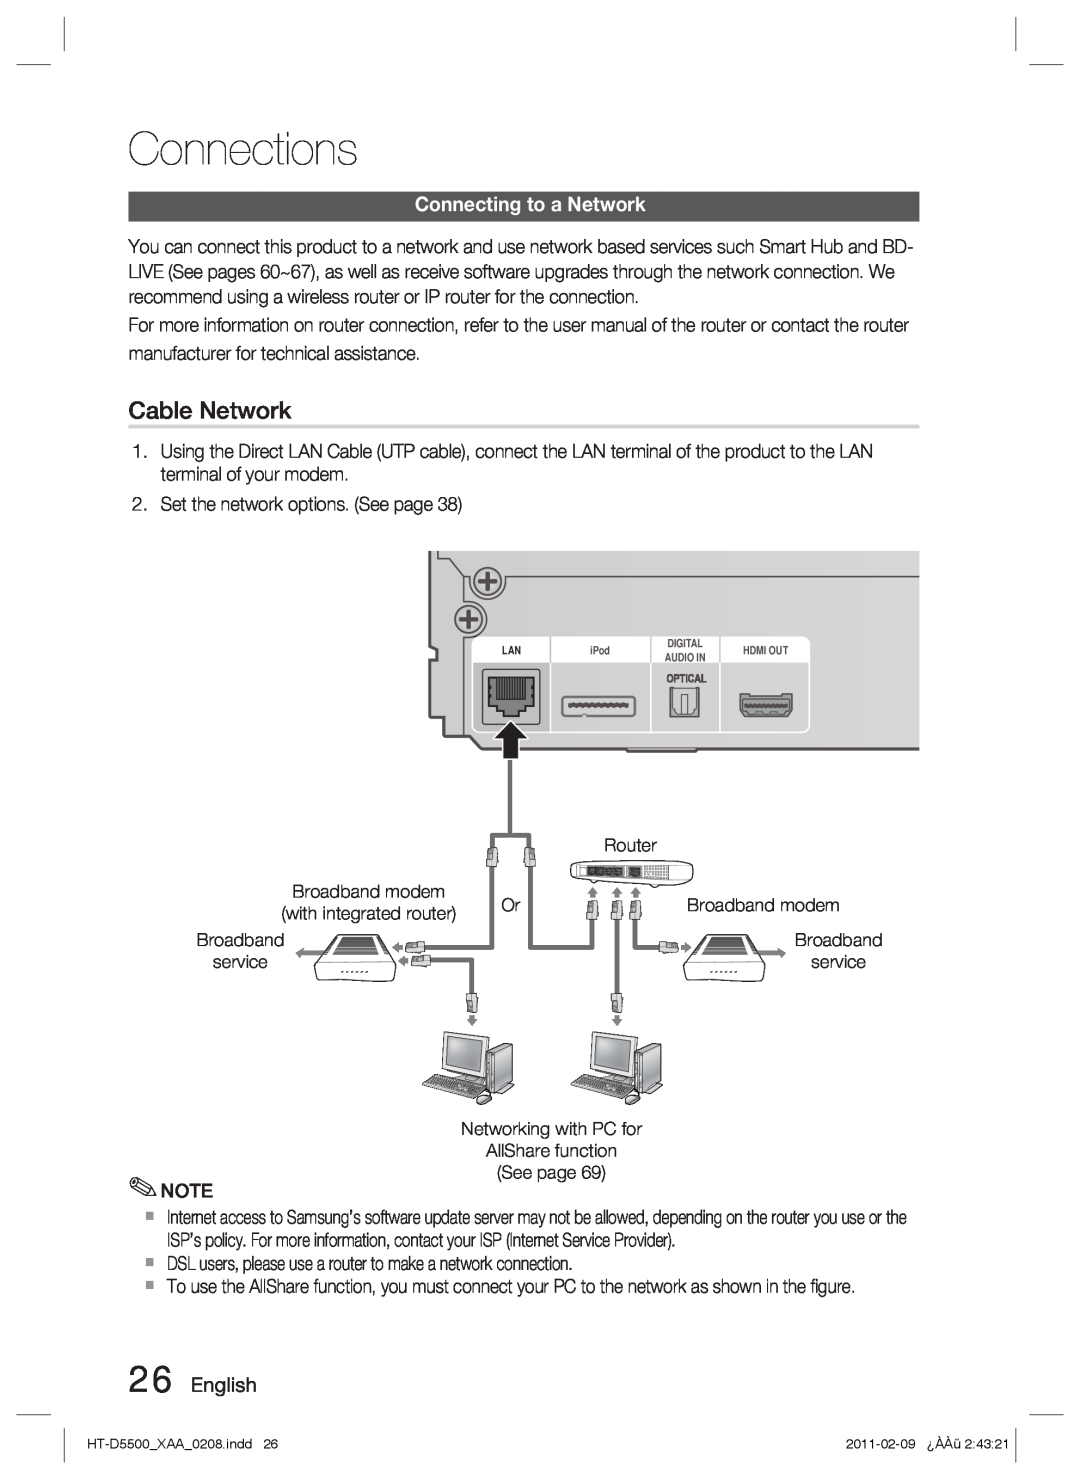 Samsung D5500 user manual Cable Network, Connecting to a Network, Connections 